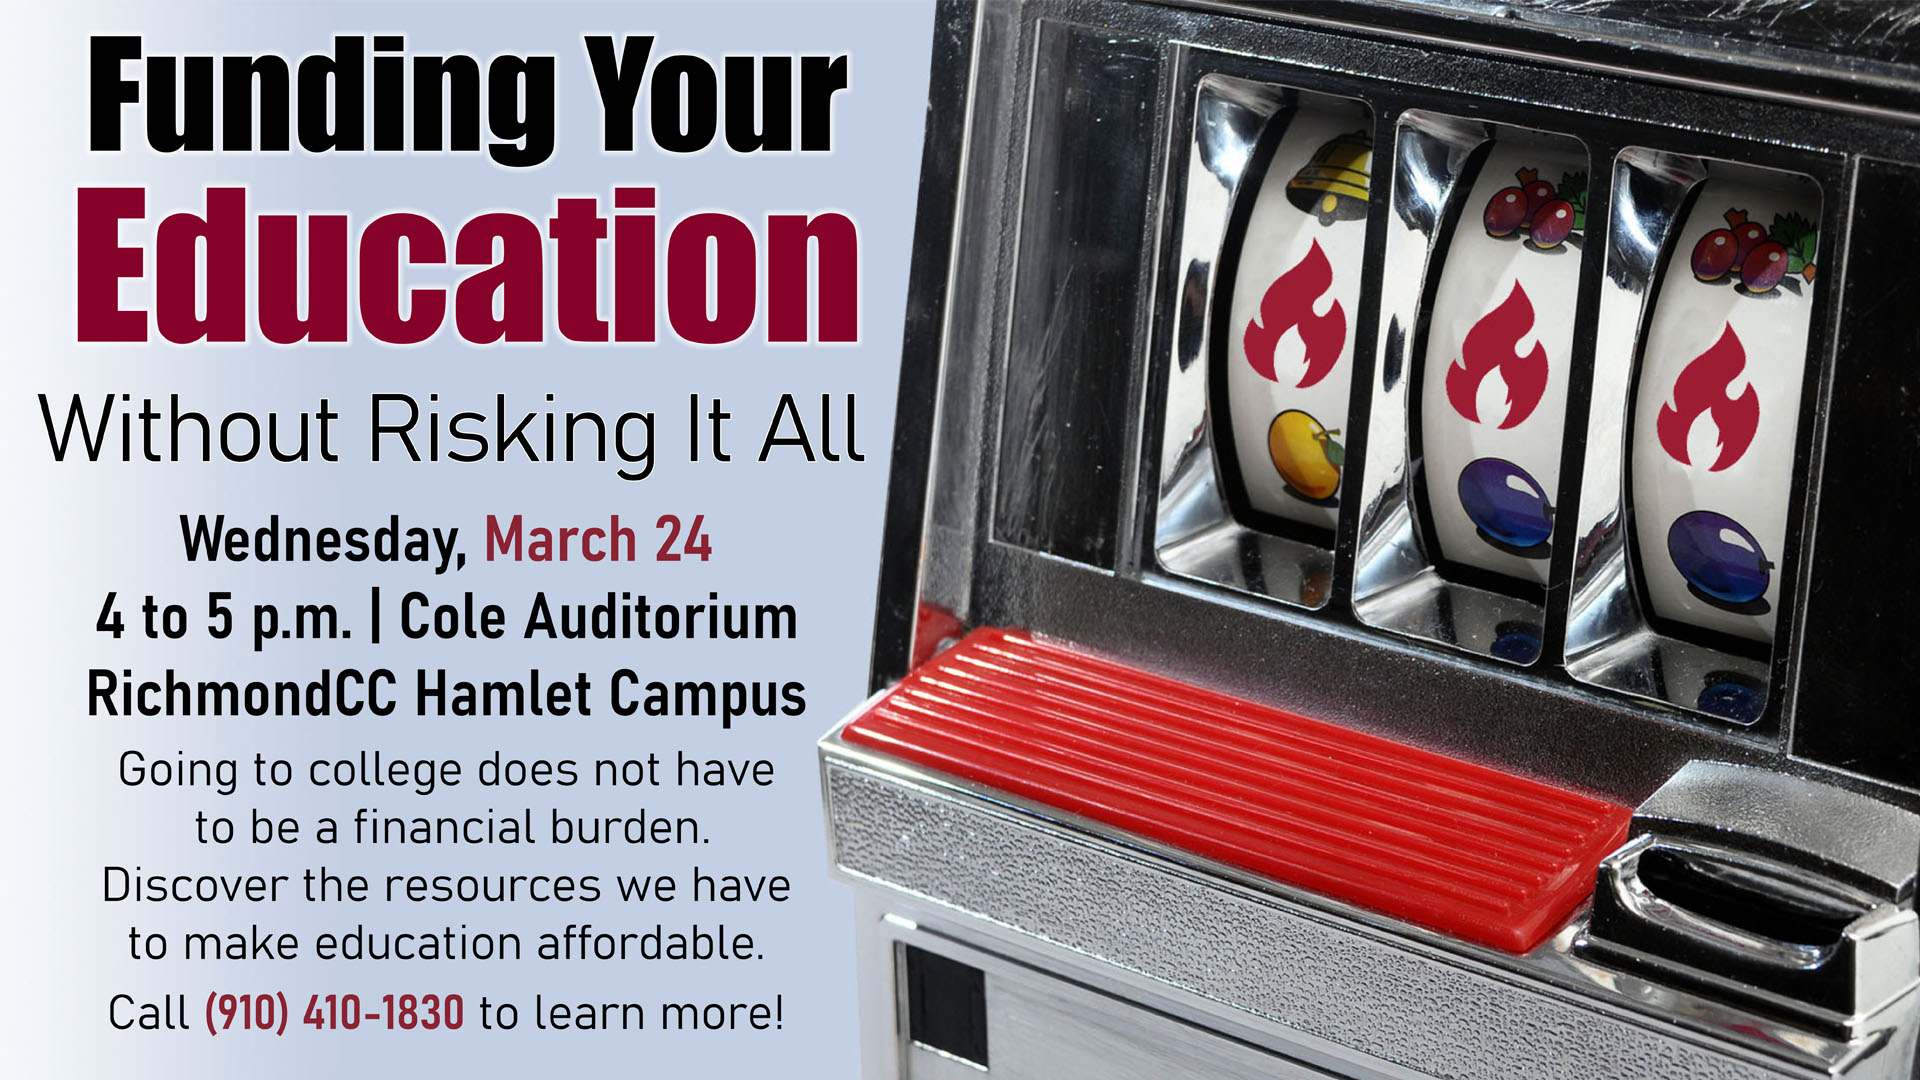 Funding Your Education Without Risking It All March 24 from 4 to 5 p.m. at the Cole Auditorium